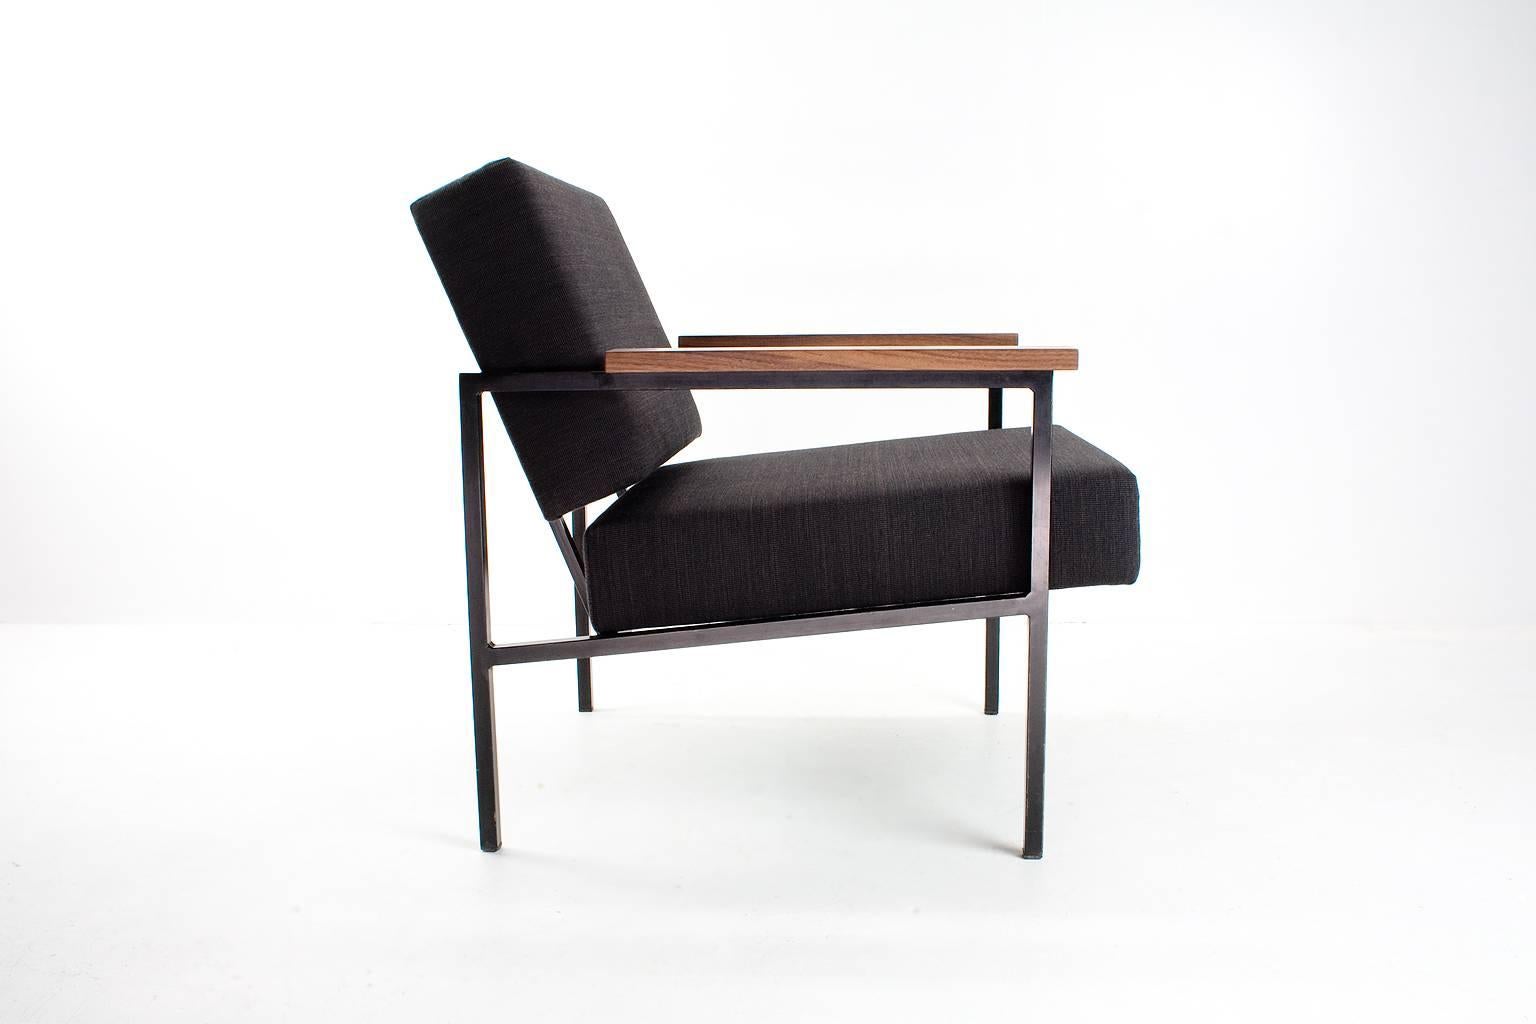 Re-upholstered 1950s Dutch Mid-Century Modern lounge chair. 

The item is new upholstered in a “Moss (03/79)” – De Ploeg (NL) fabric. New fillings and new walnut armrests. The black metal frame is original with slight traces of use, but